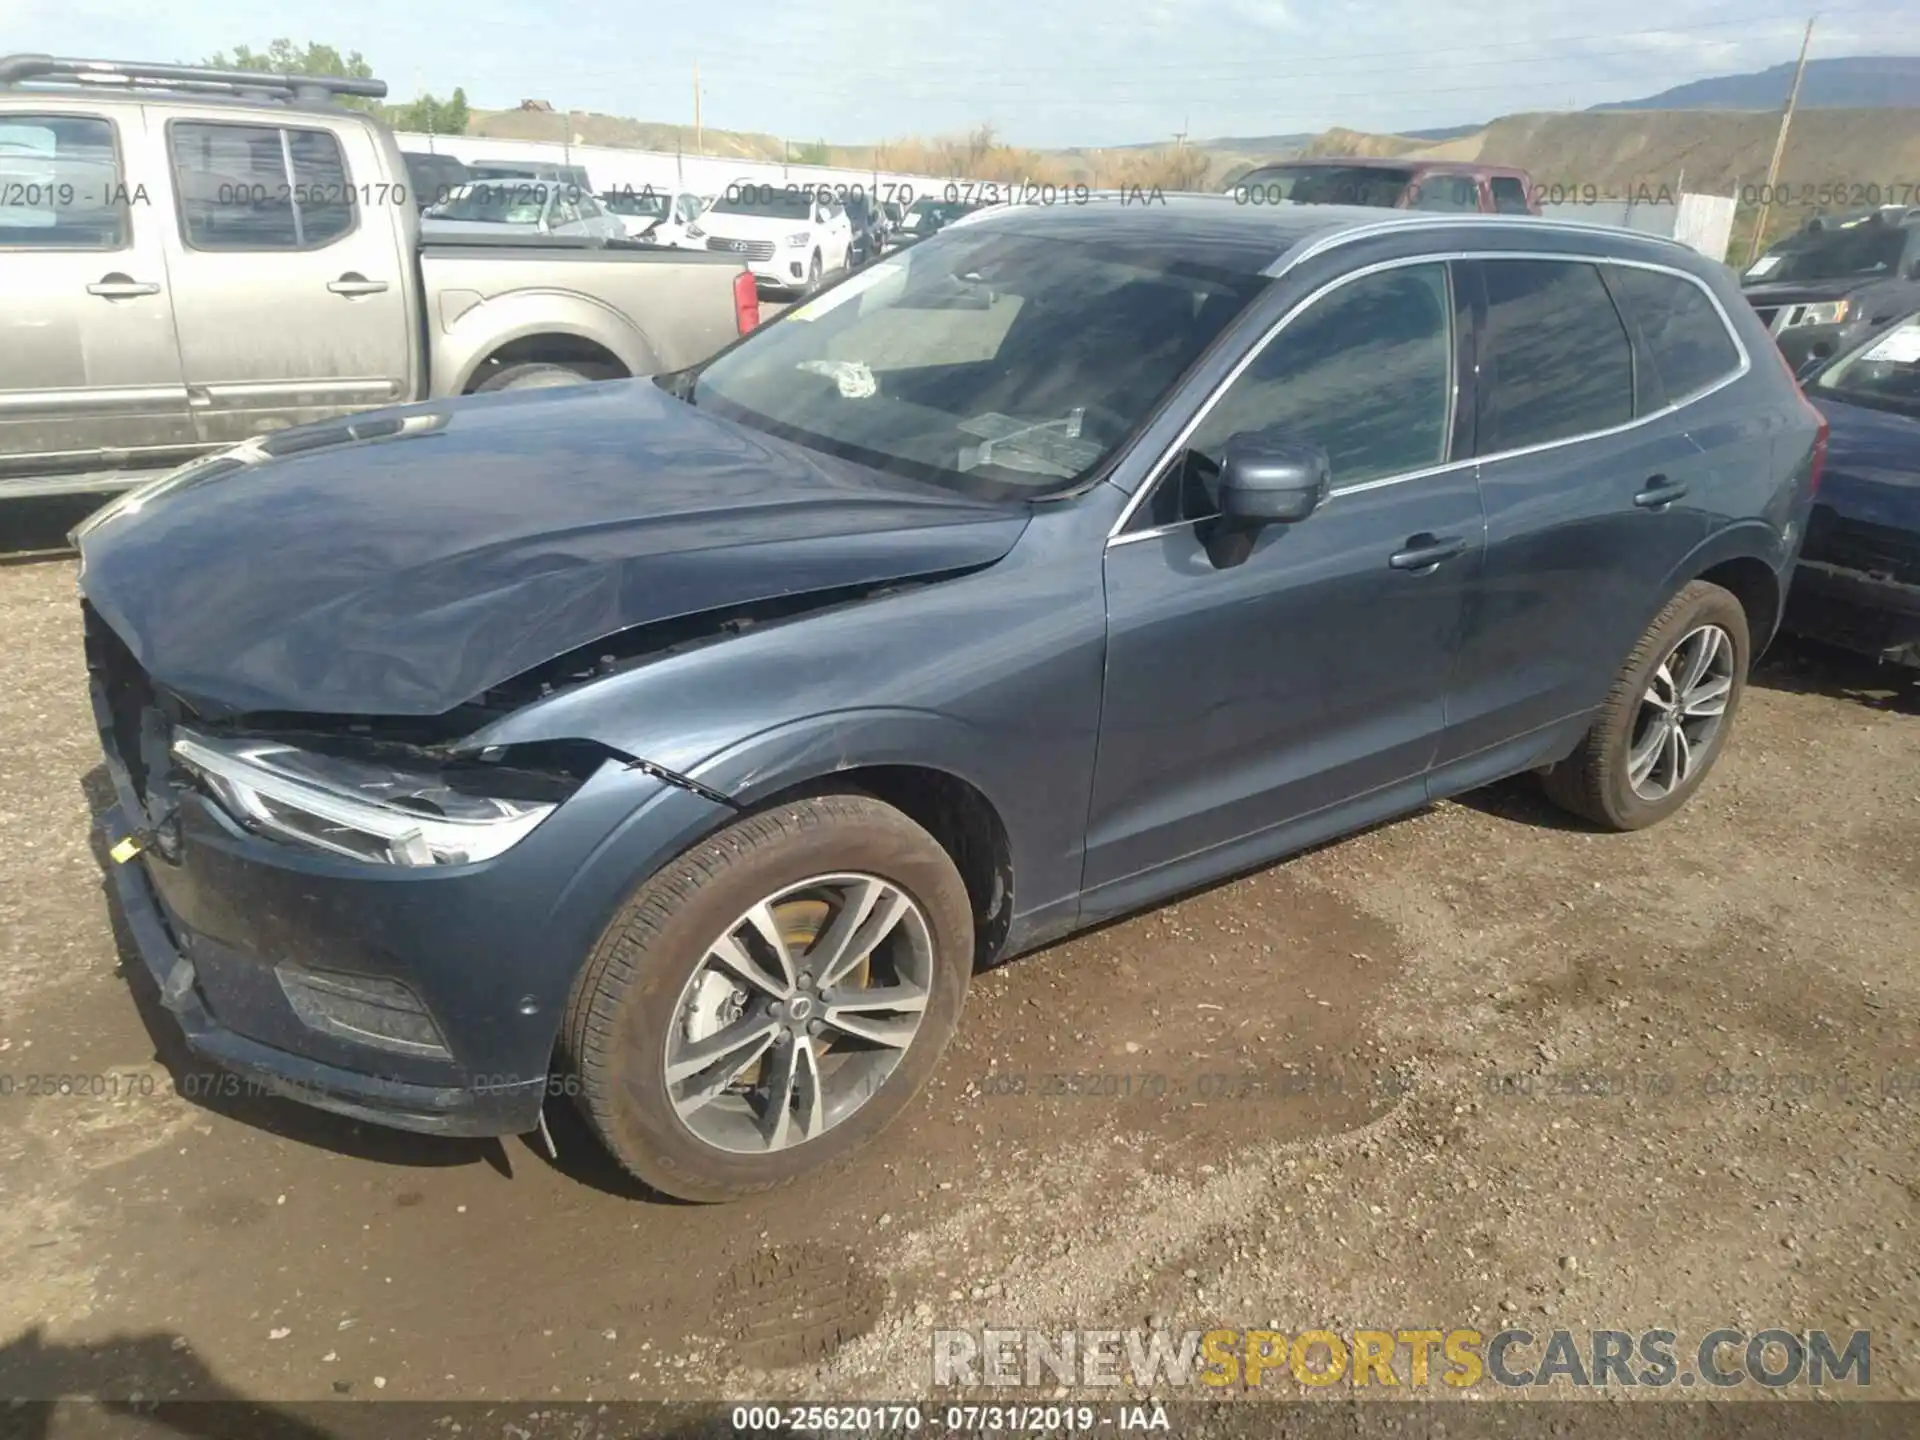 2 Photograph of a damaged car YV4A22RK2K1328433 VOLVO XC60 2019